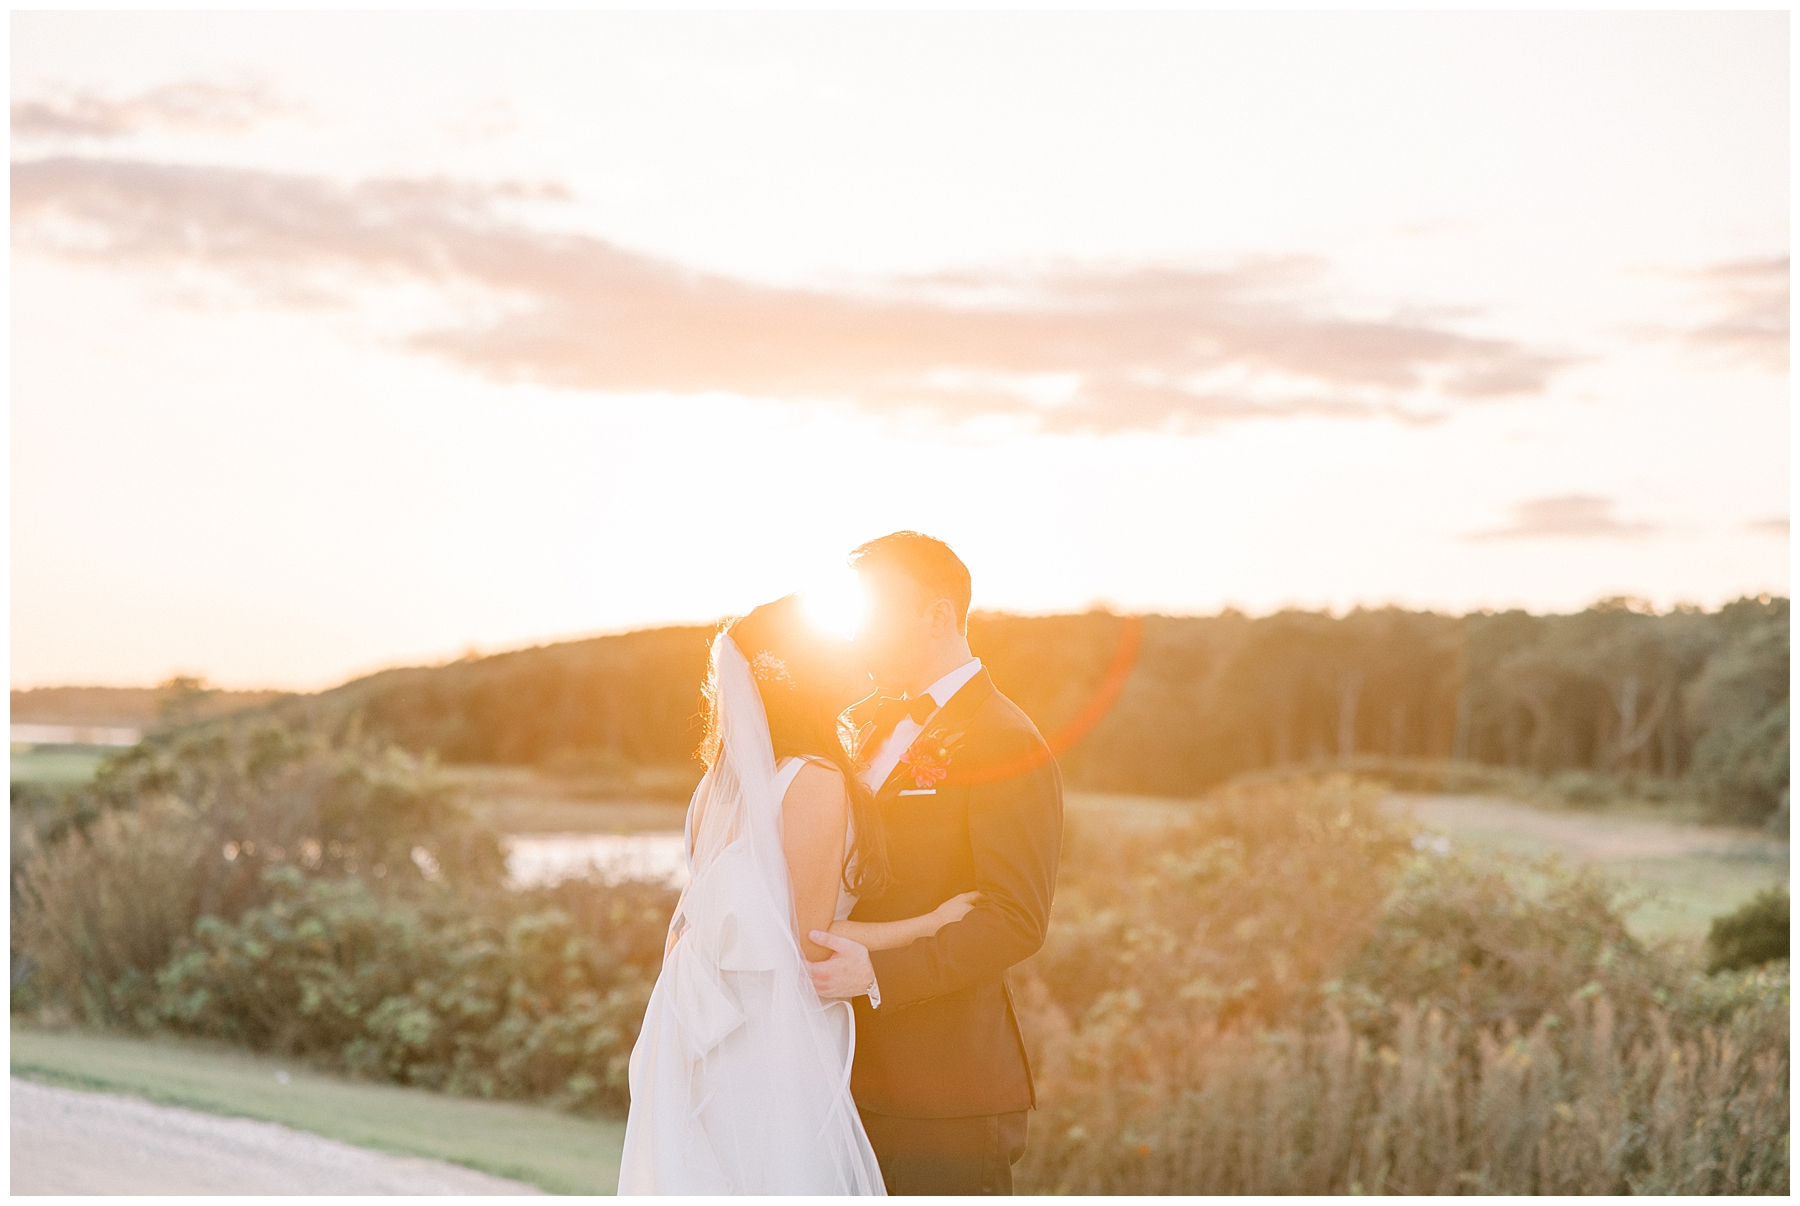 Best Cape Cod Wedding Venues photographed by Cape Cod Wedding Photographer Stephanie Berenson